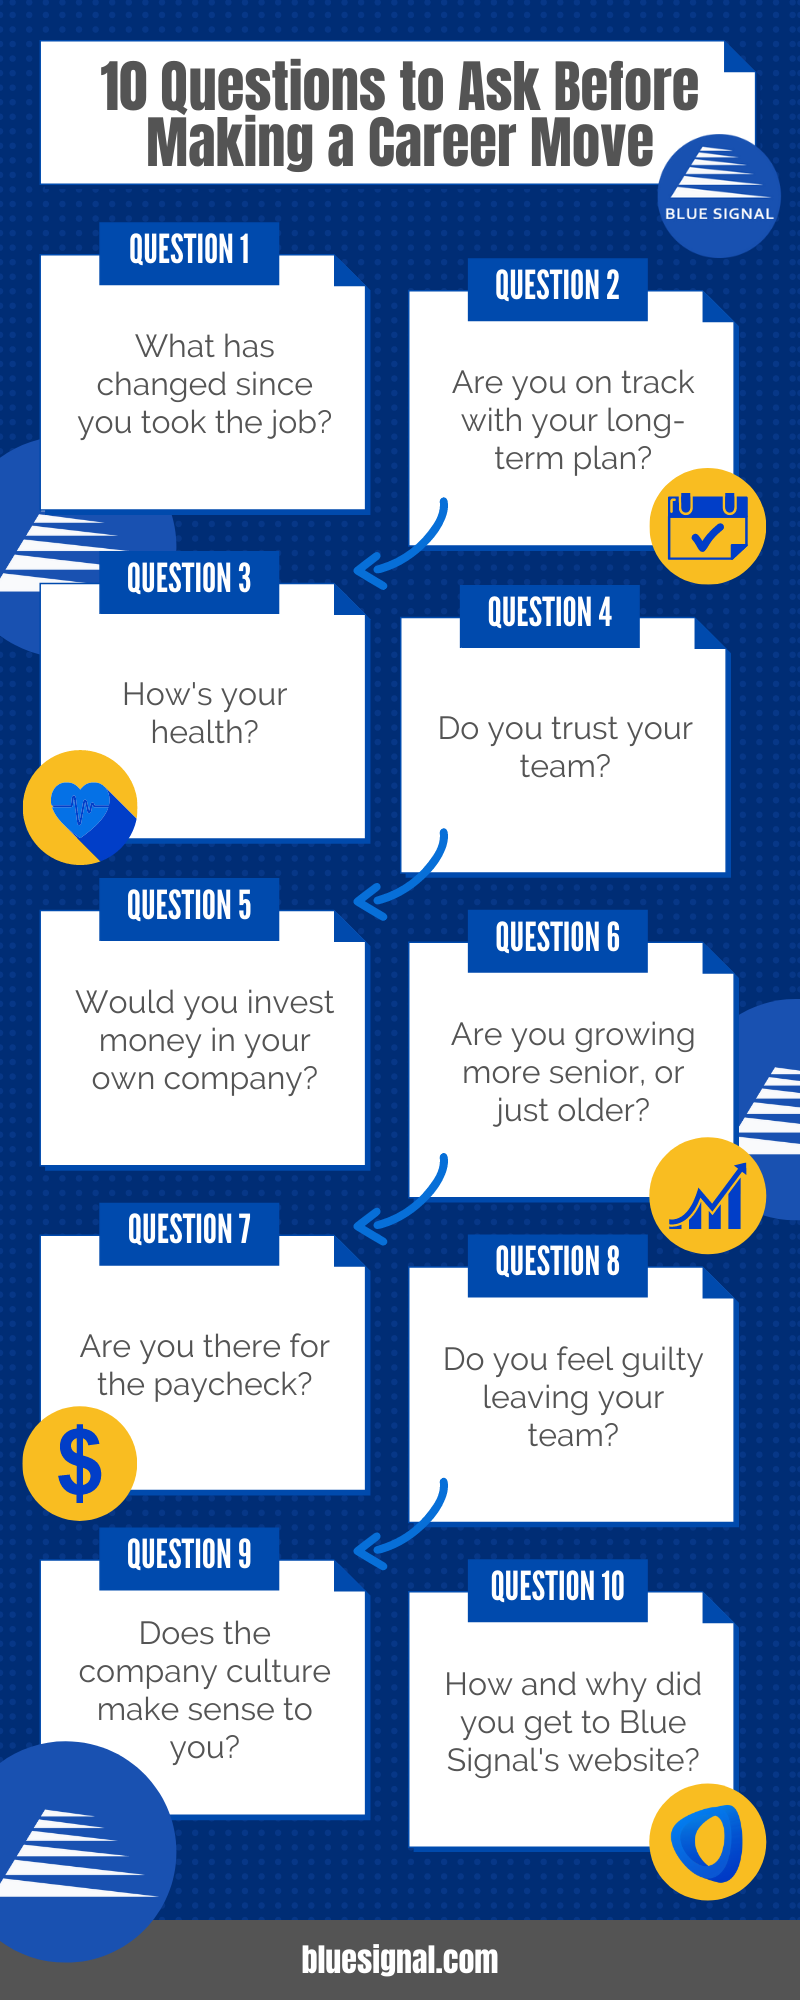 10 Questions to Ask Before a Career Move Downloadable Guide